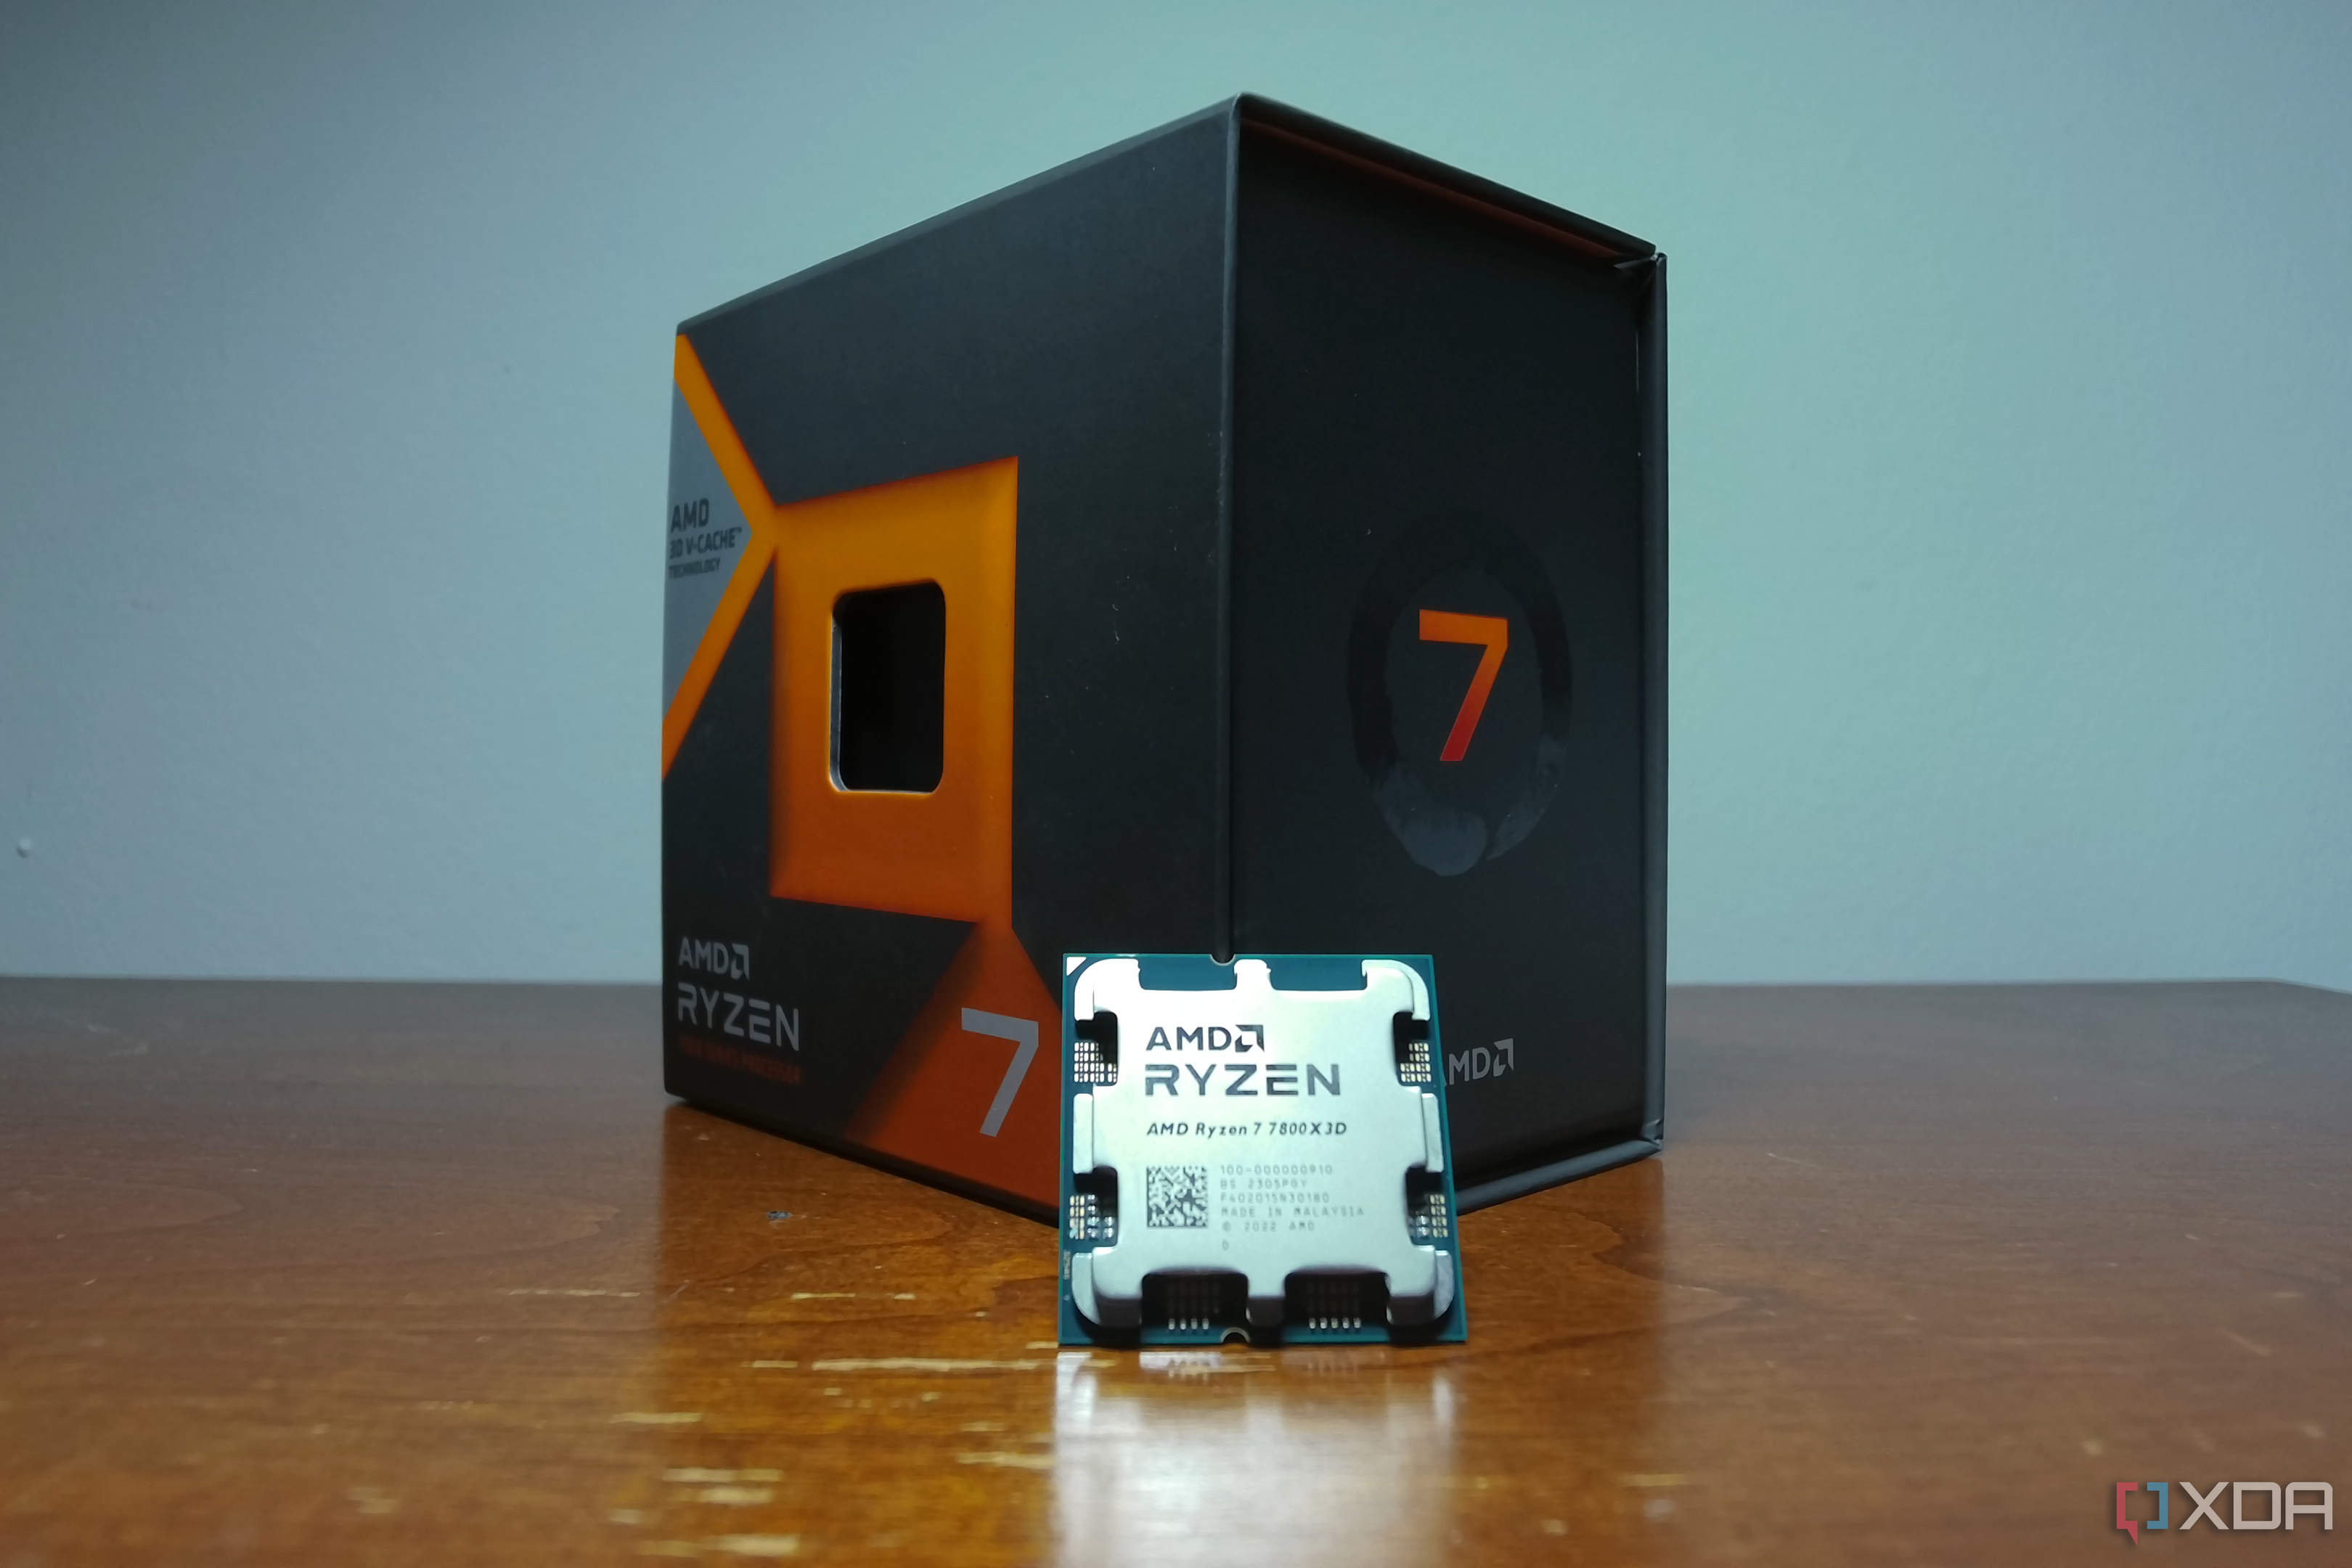 AMD Ryzen 7 7800X3D CPU review: A must-have for framerate 